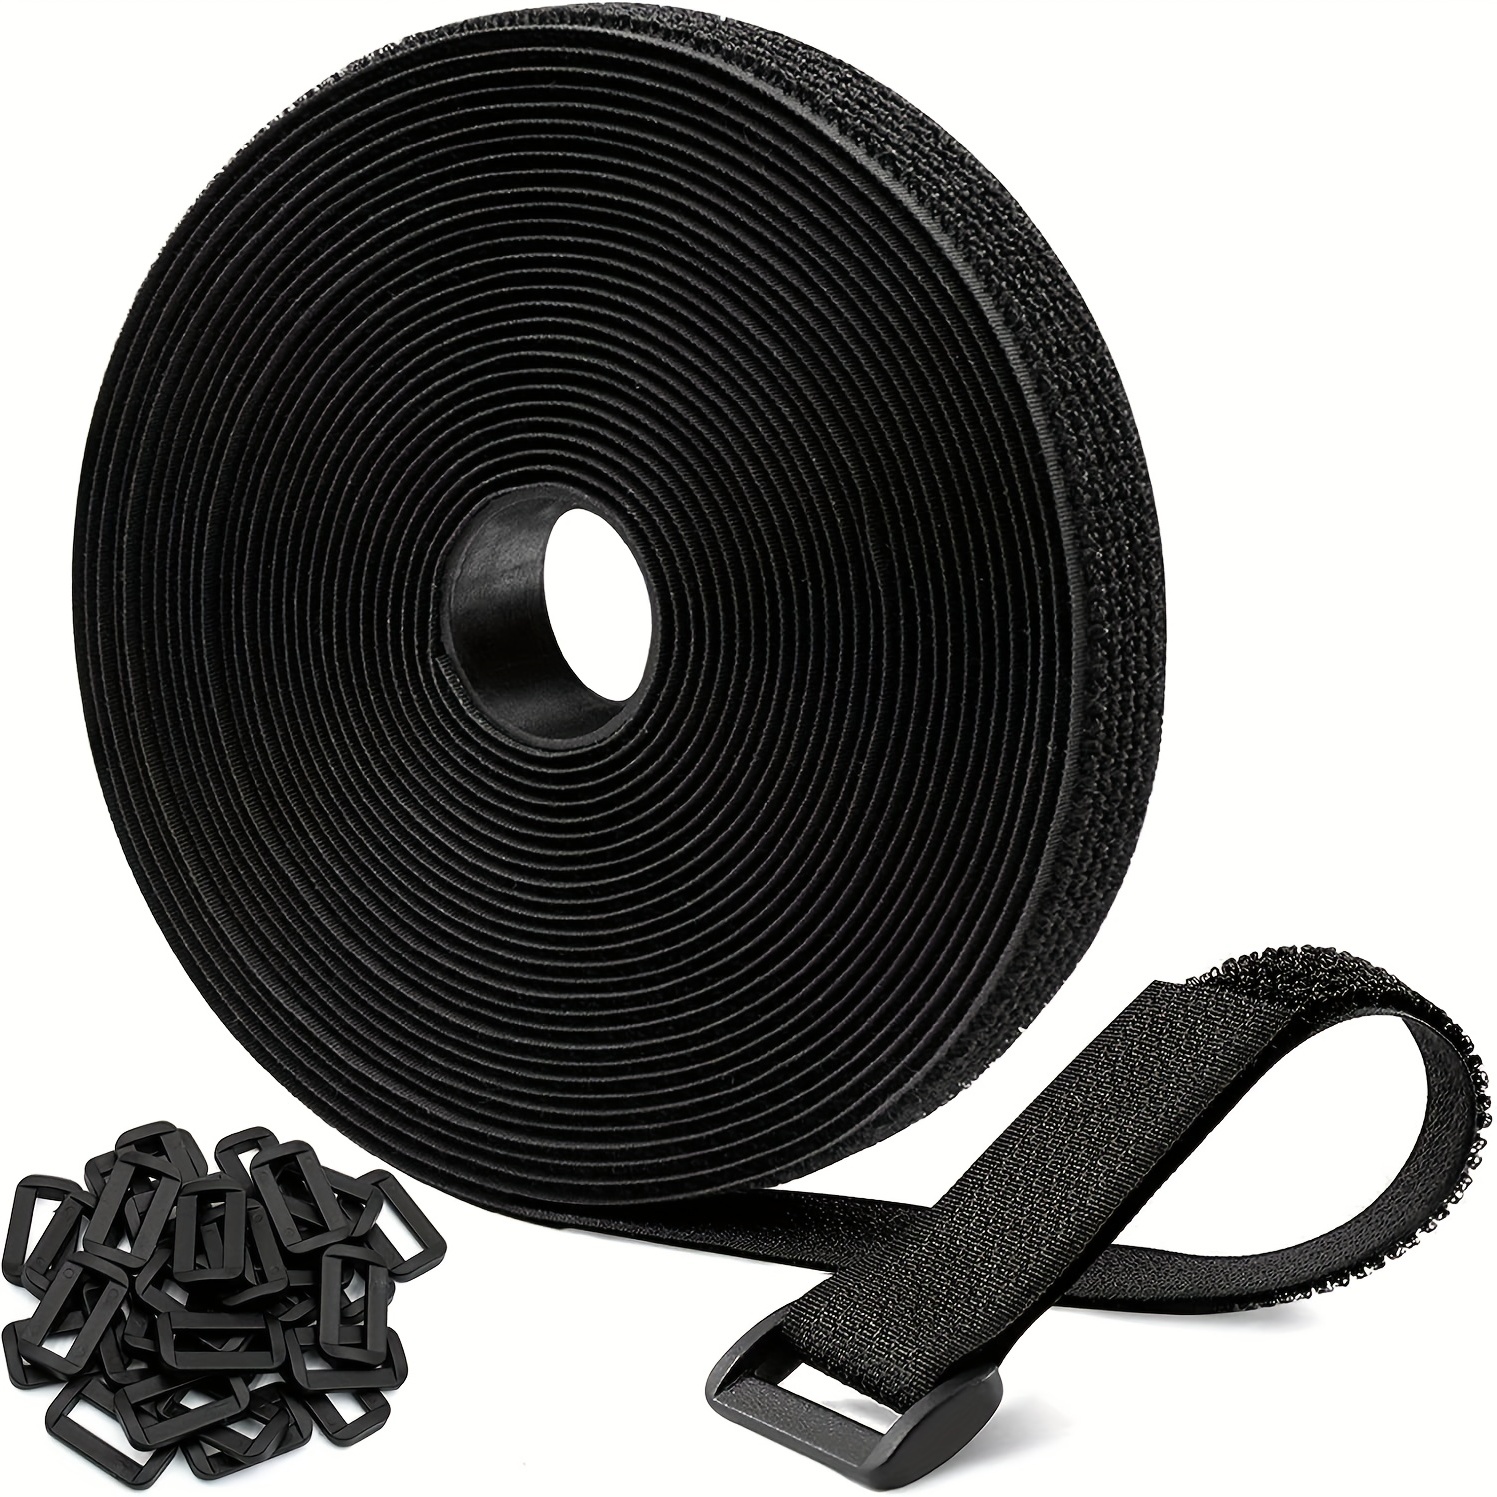 Reusable Cinch Straps 2 x 72 - 2 Pack - Hook and Loop Straps (Black)